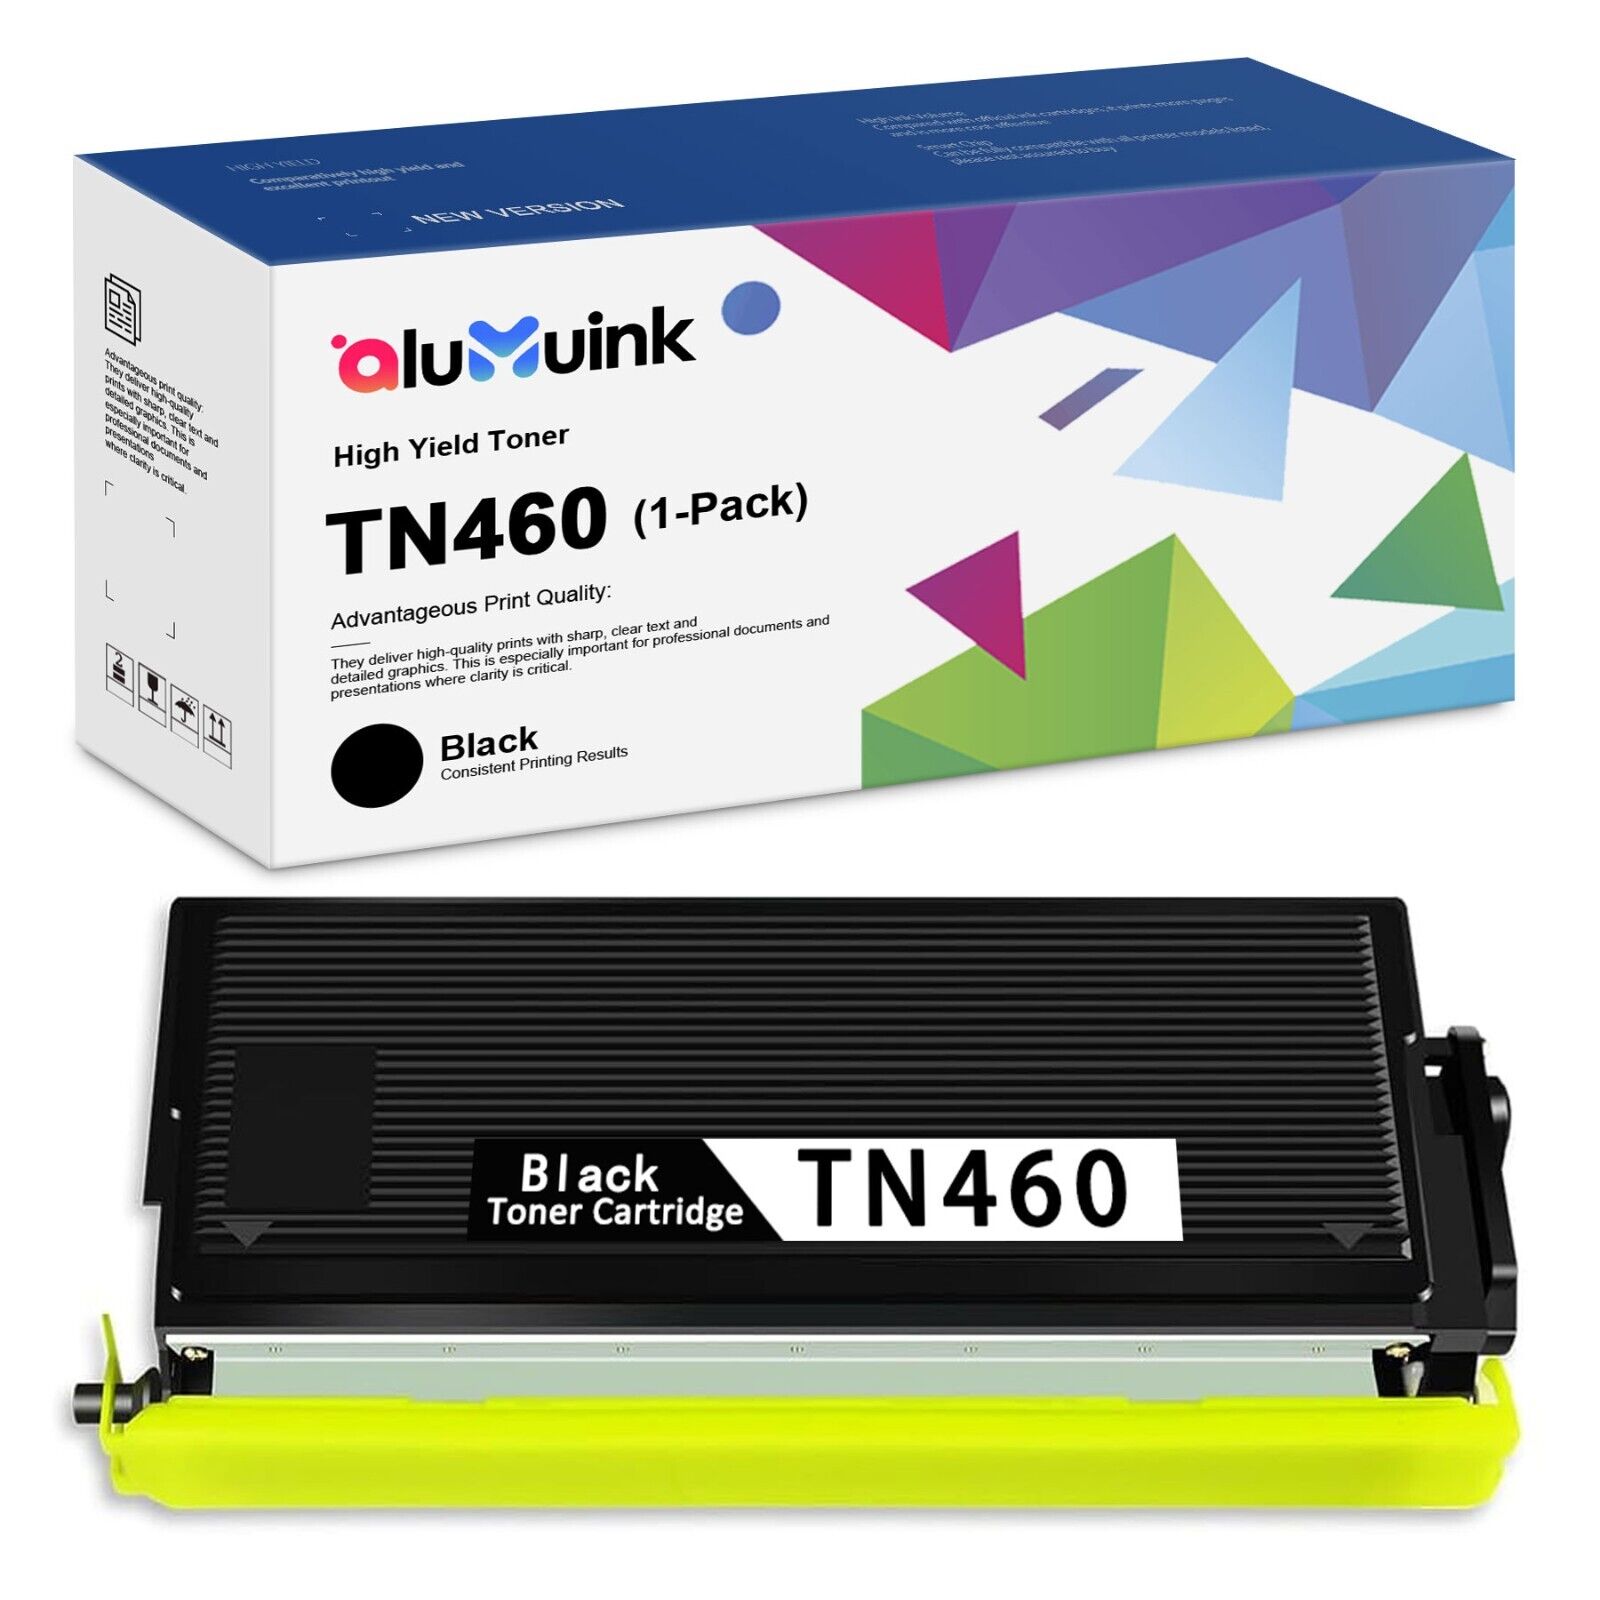 TN-460 TN460 Toner Cartridge Replacement for Brother TN460 Black MFC-8300